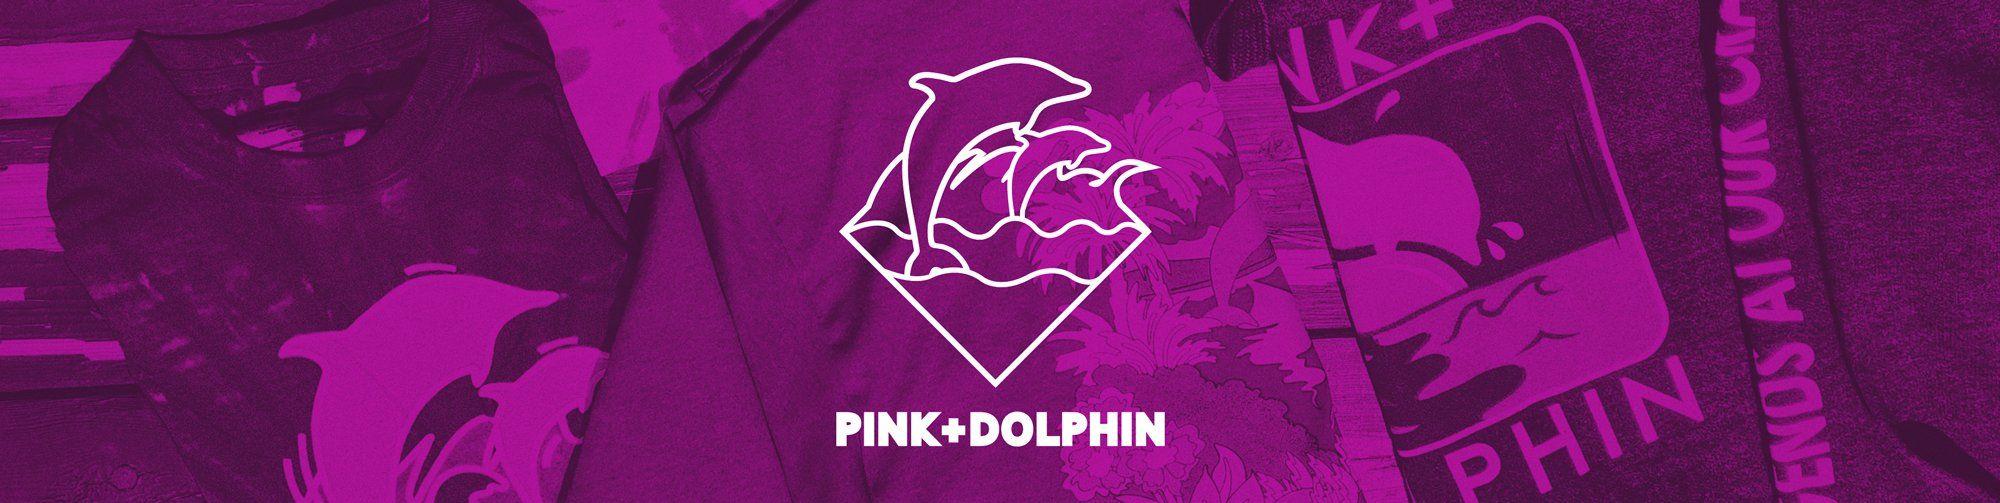 White Pink Dolphin Logo - Pink Dolphin